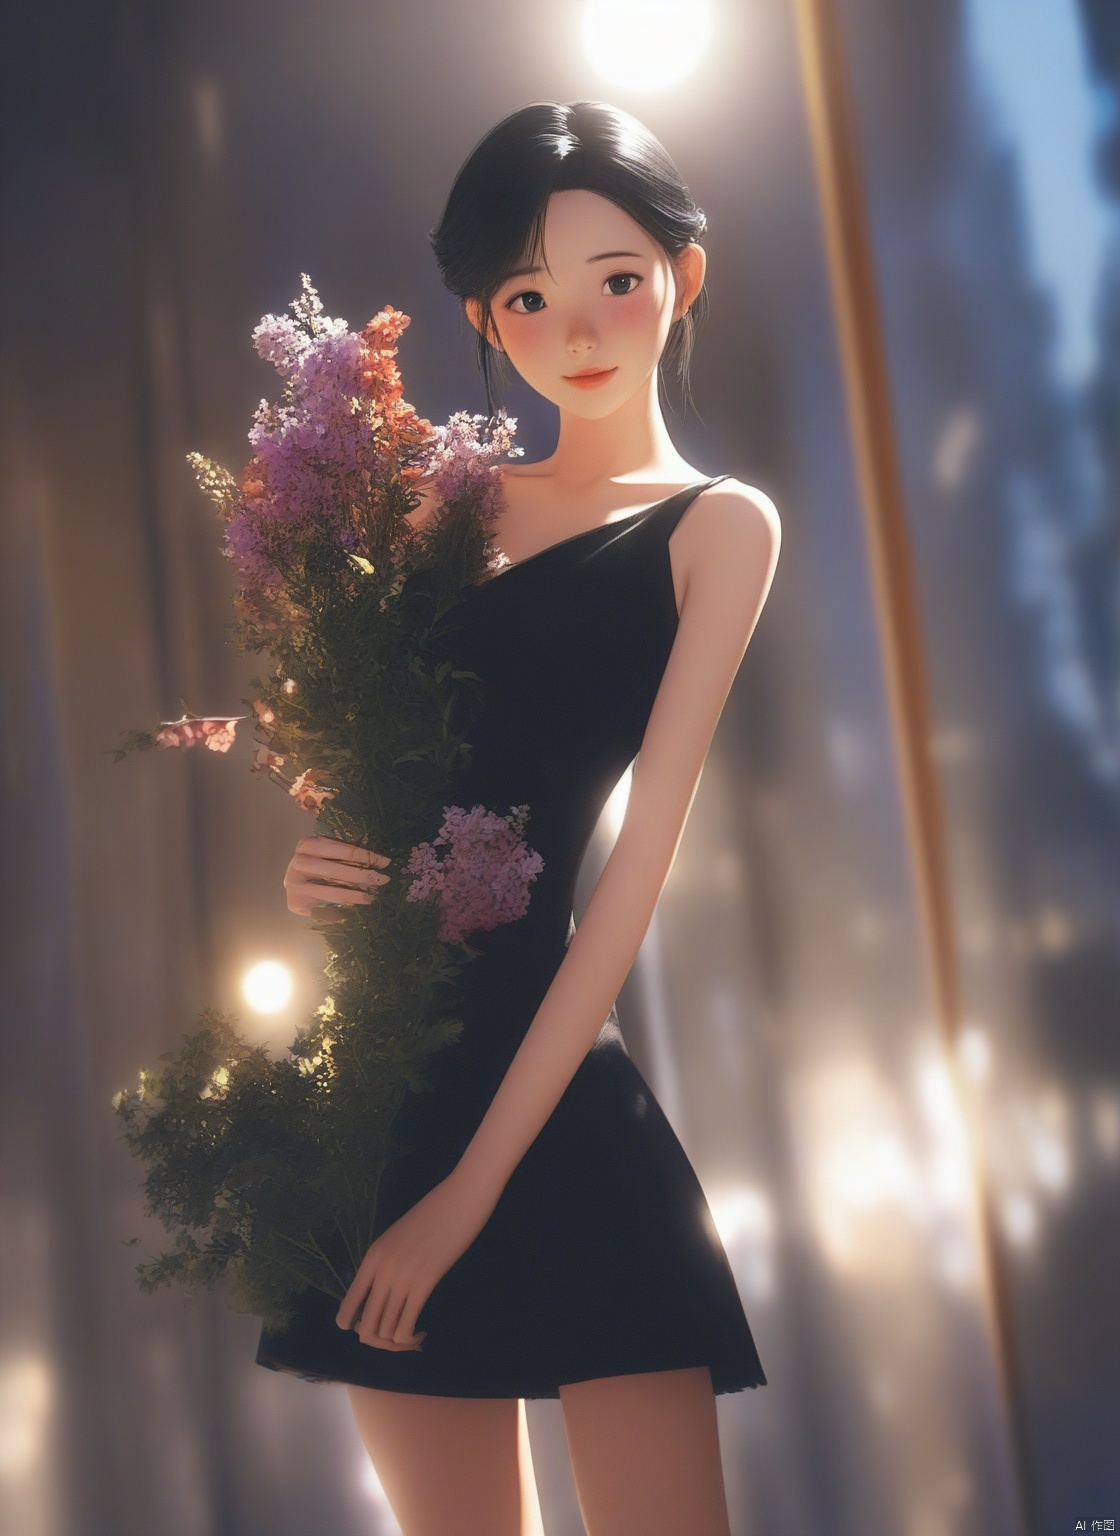  1girl,8k wallpaper,extremely detailed figure, amazing beauty, detailed characters, indoor,black dress, holding flowers, light and shadow, depth of field, light spot, reflection,upper body,nigth,street